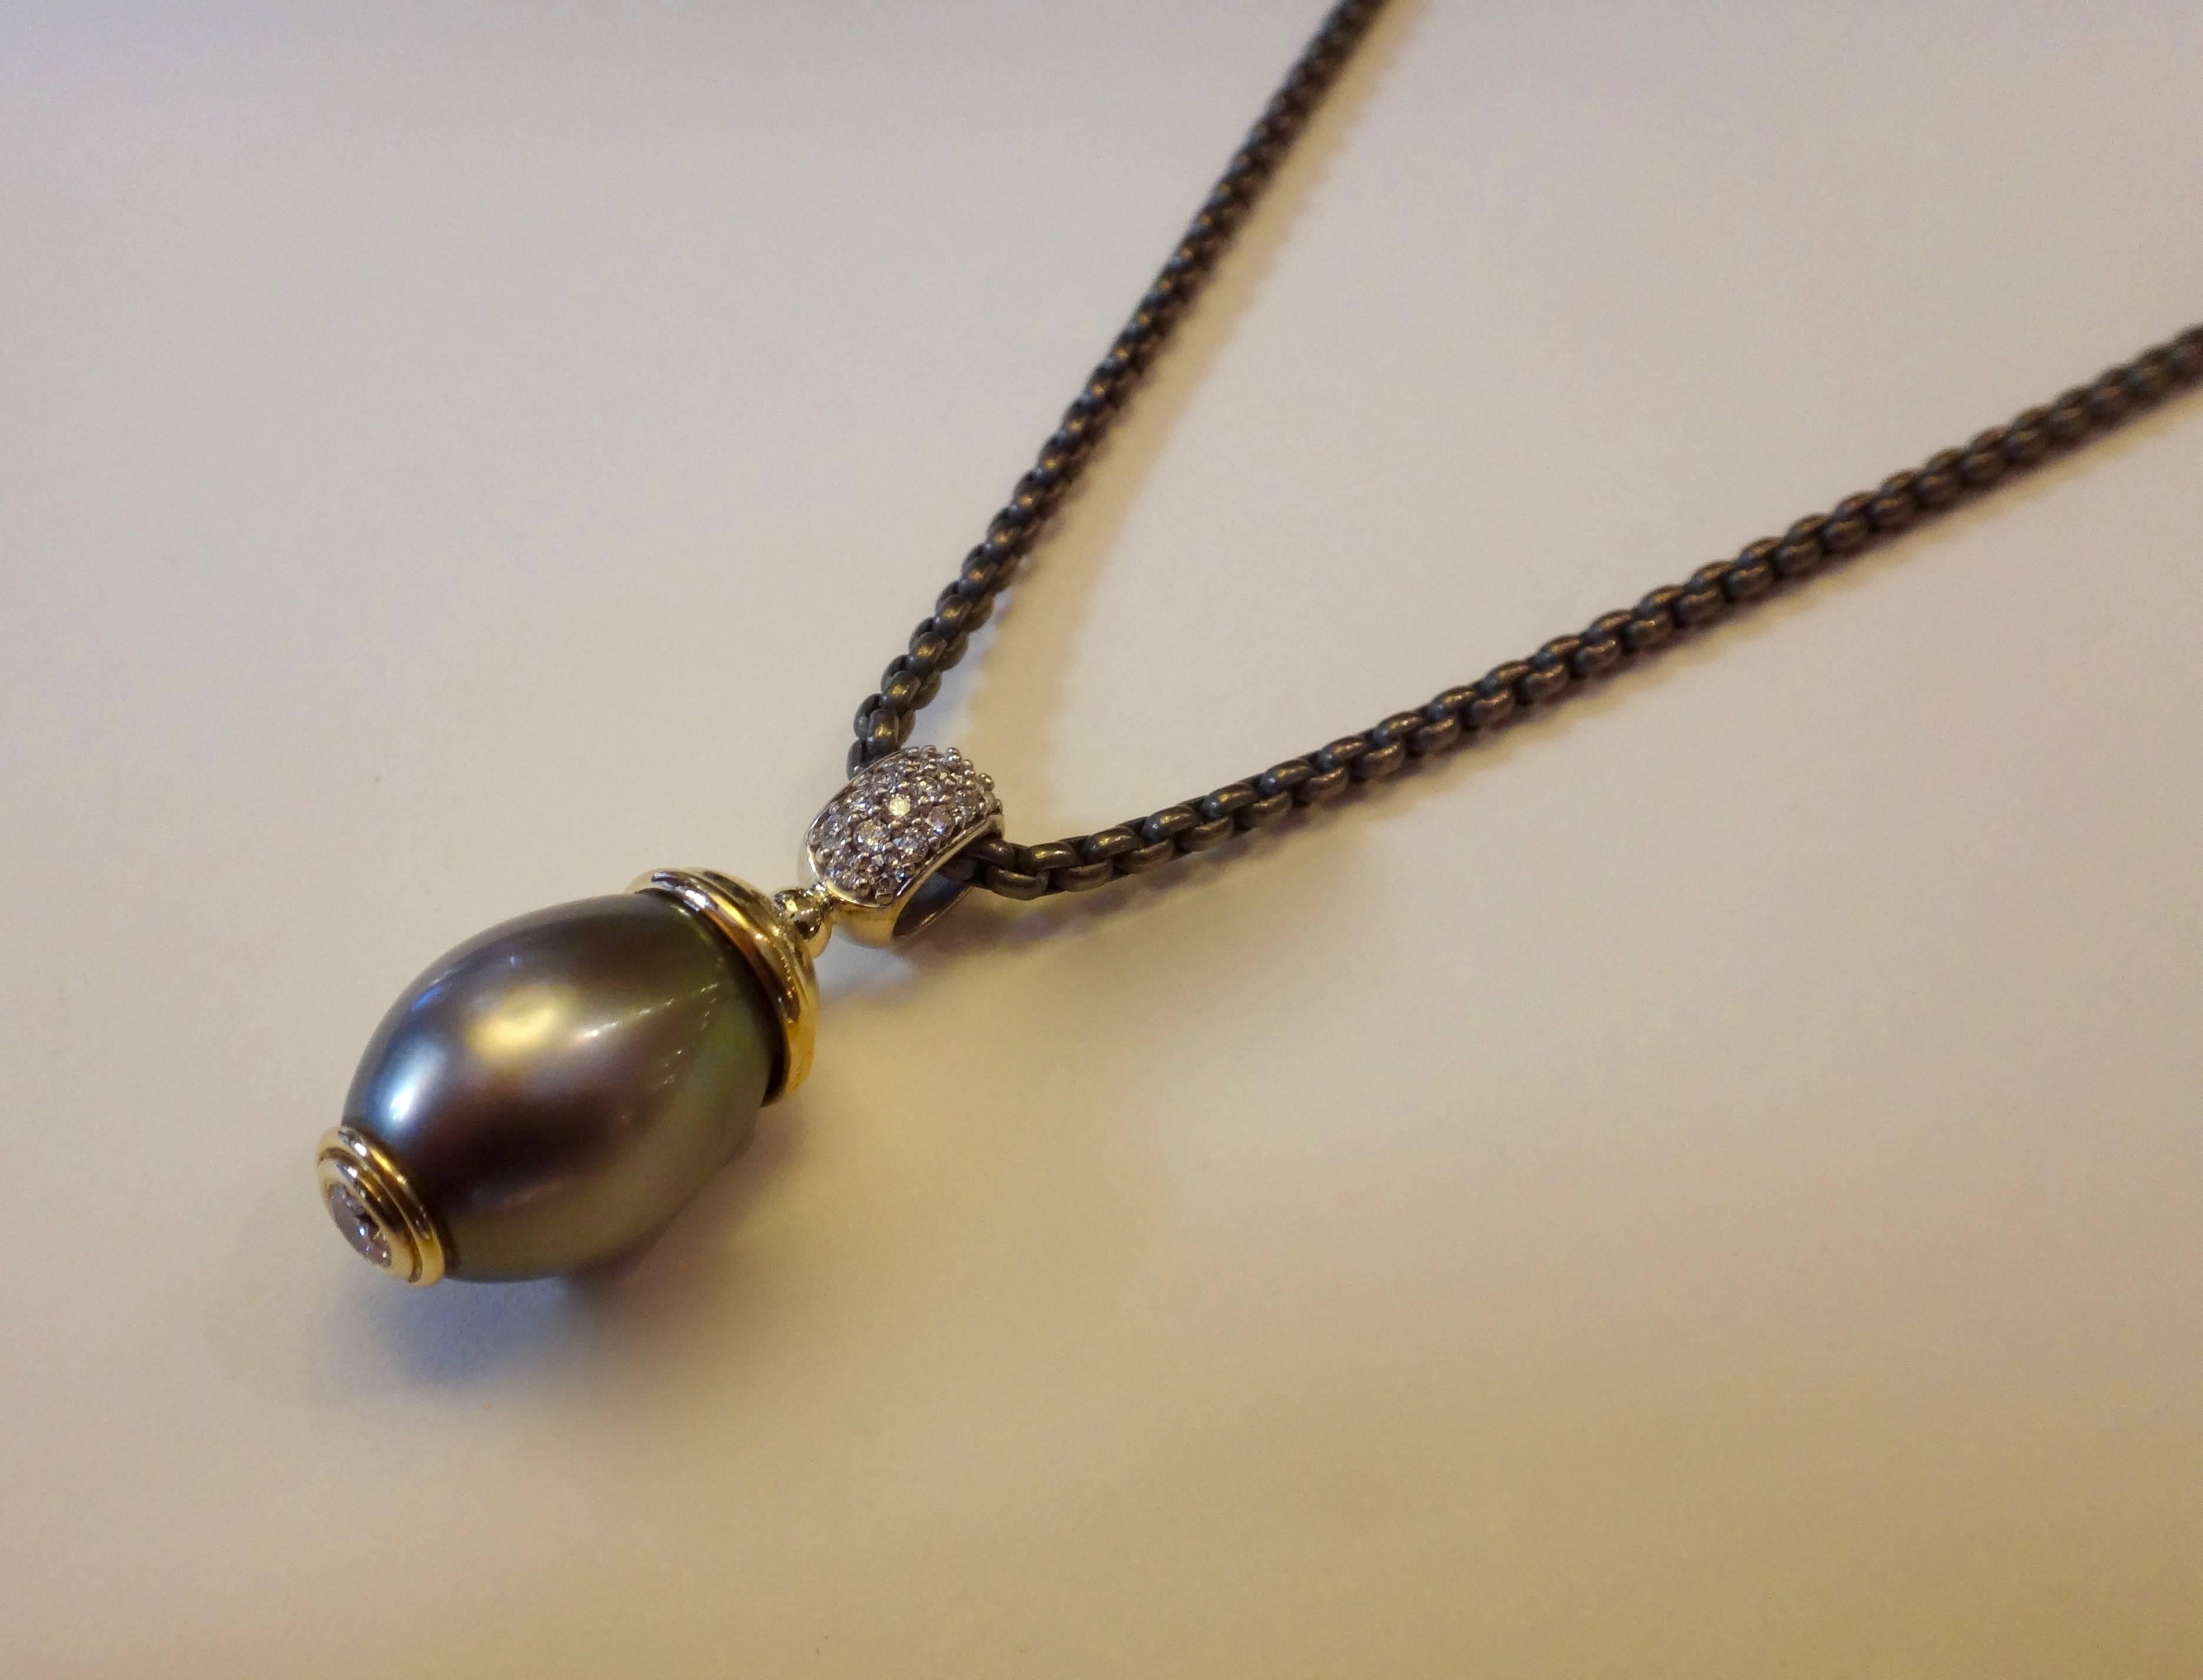 Reminiscent of the egg pendants created by the great House of Faberge in the previous century, comes this Tahitian pearl pendant.  The gem quality pearl is of a medium gray color, possesses a silky luster and reflects a range of peacock colors.  The